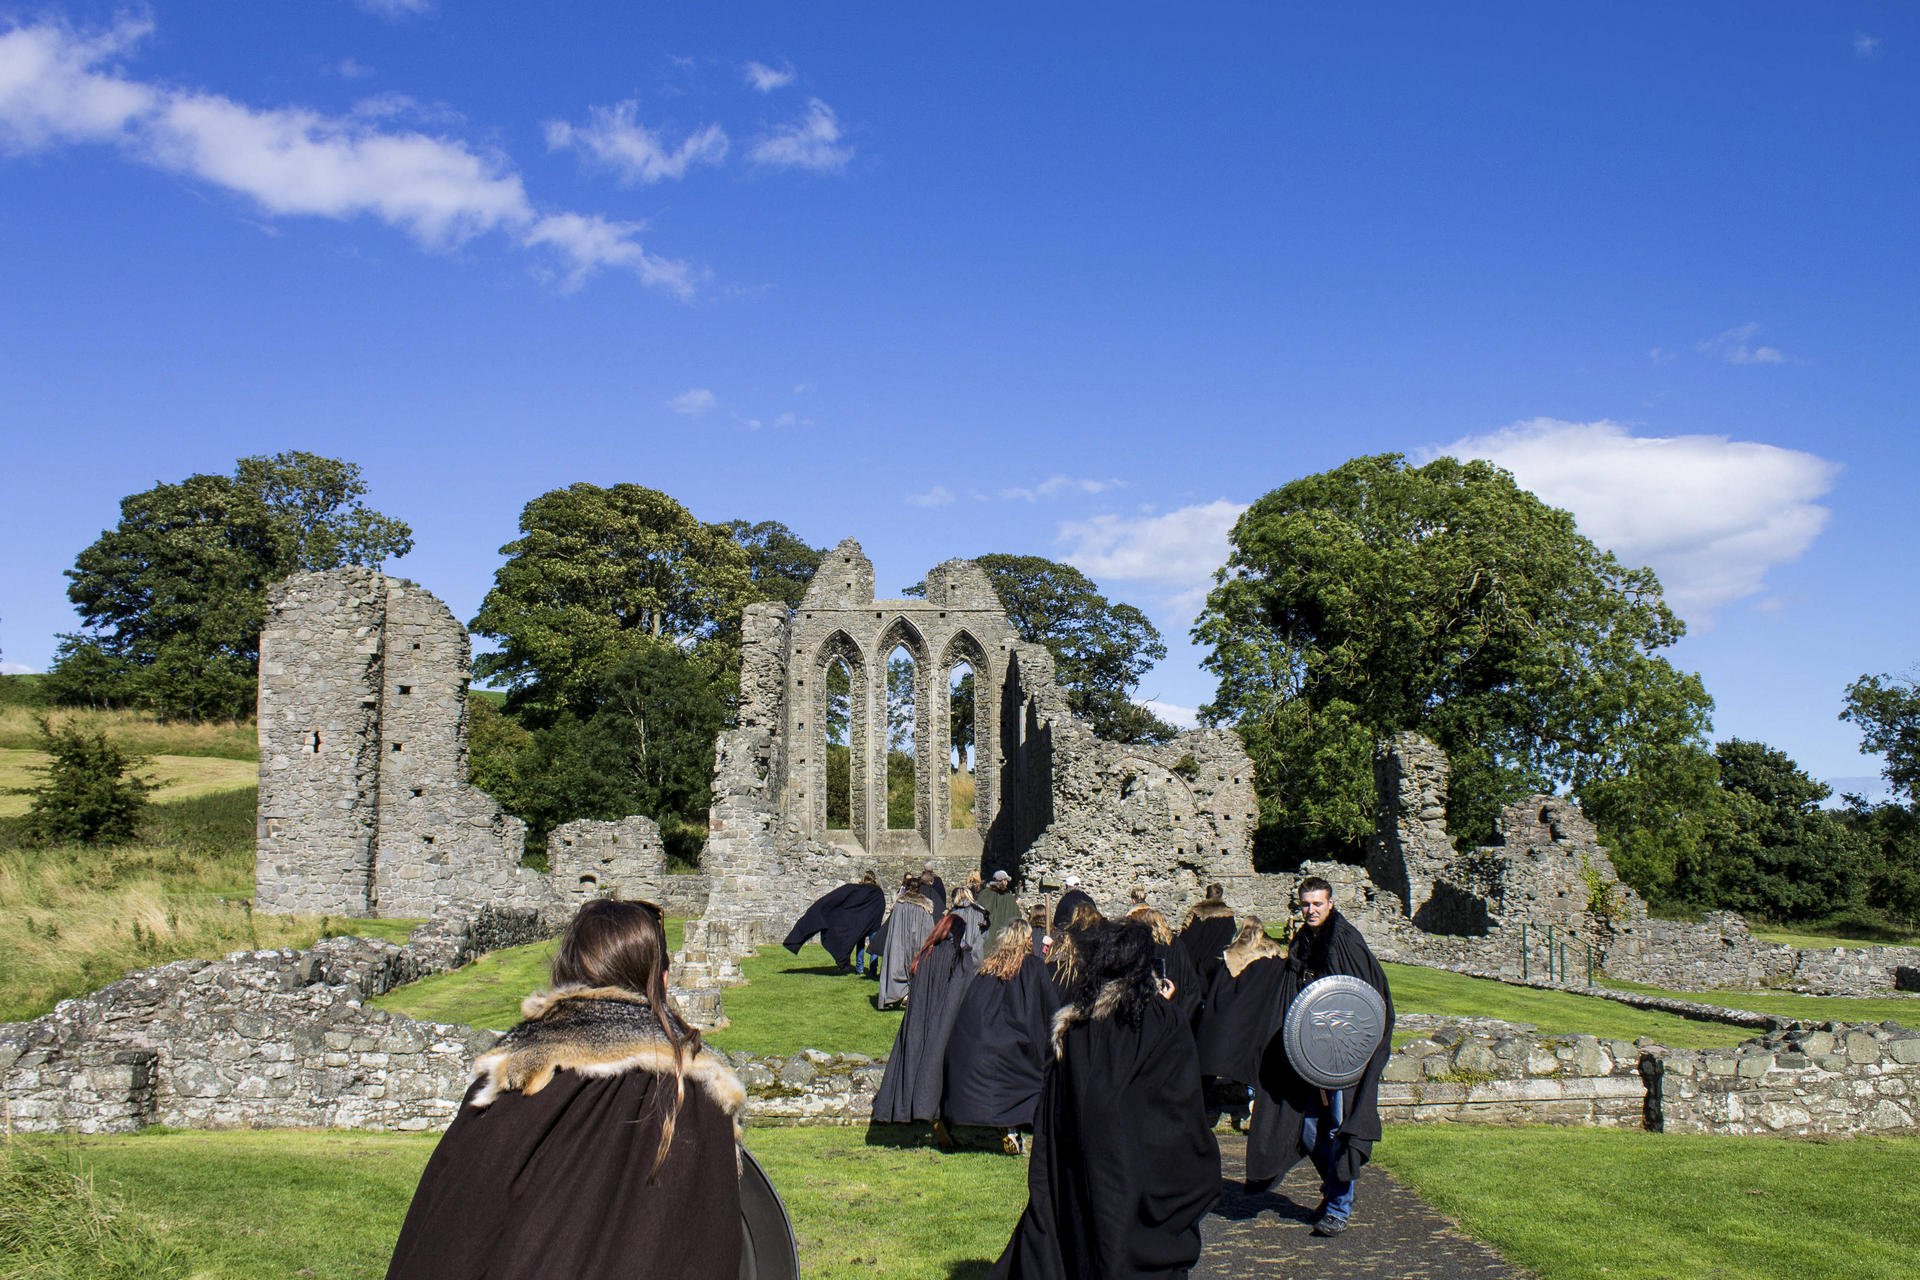 The ruins of Inch Abbey, a set location for Game of Thrones.